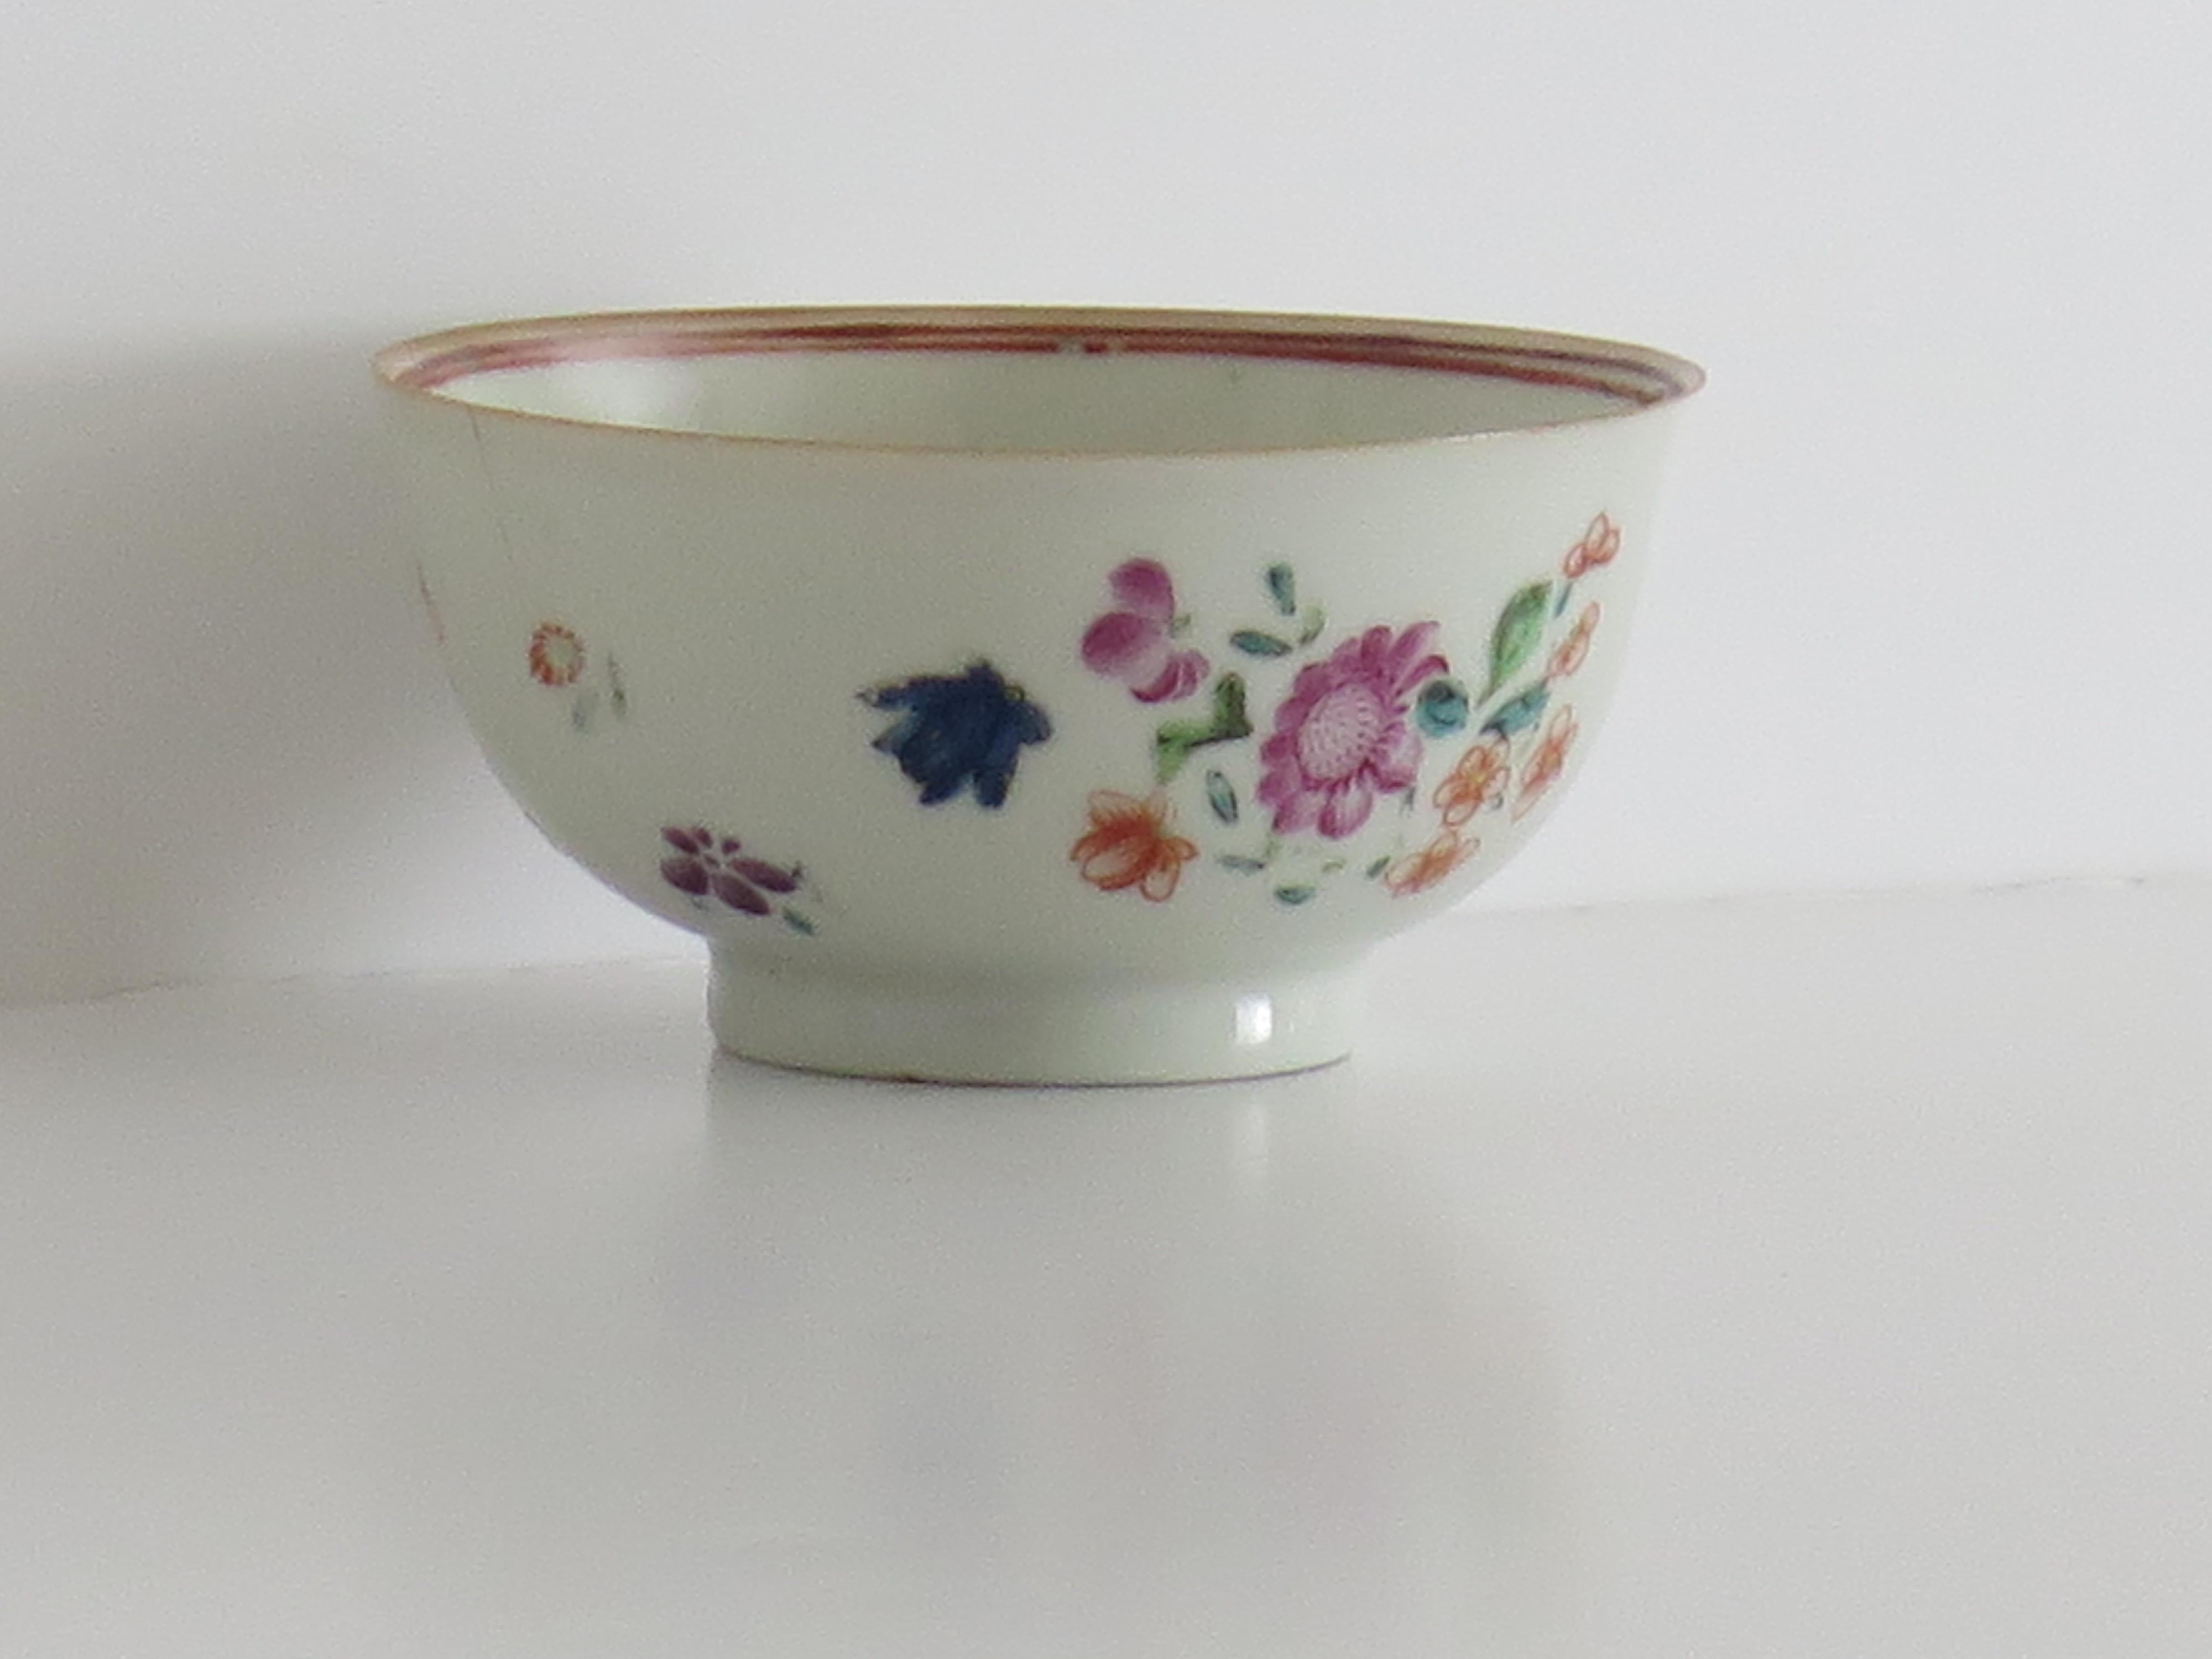 This is a hand painted Chinese export bowl from the late 18th century, Qing dynasty, Qianlong period, 1736-1795. We date this piece to circa 1780.

The bowl is well potted on mid height foot, all made from a very white porcelain.

It is well hand